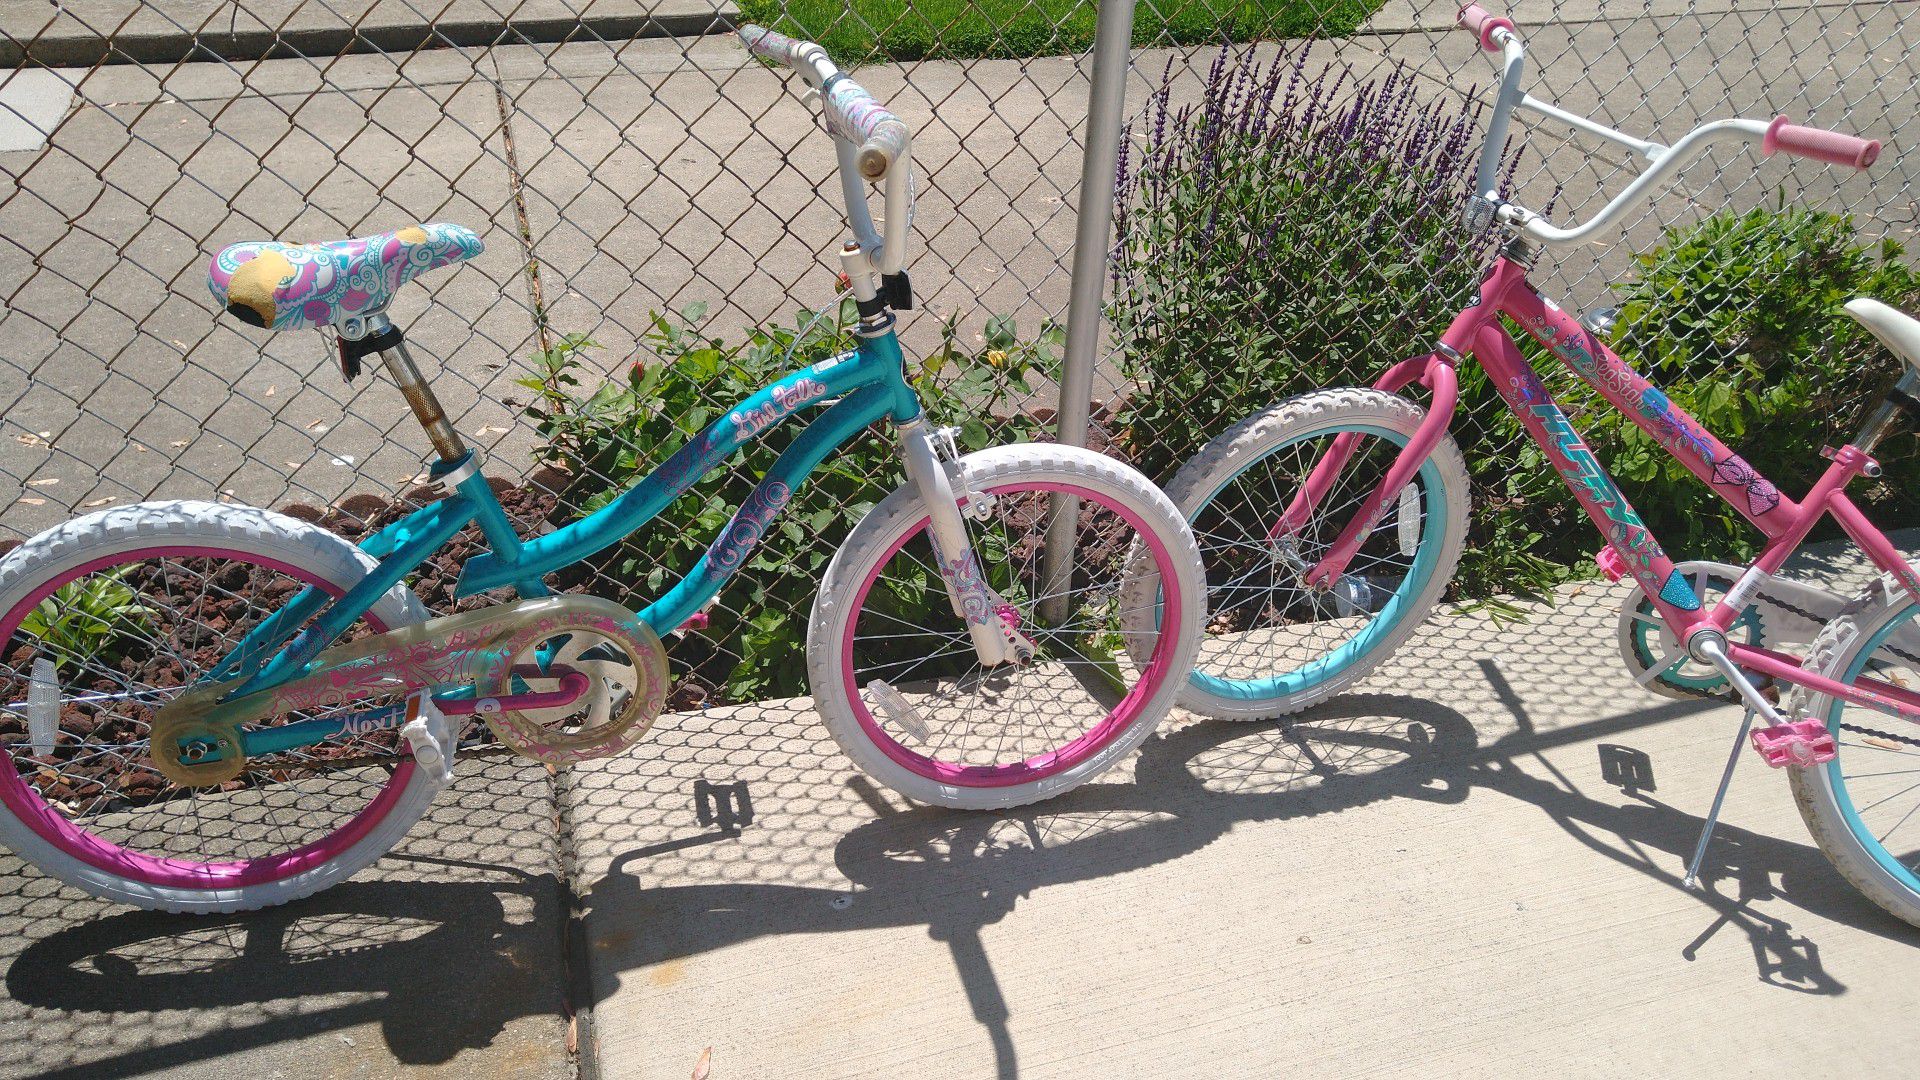 2 bikes for girls the wheel is 20inches